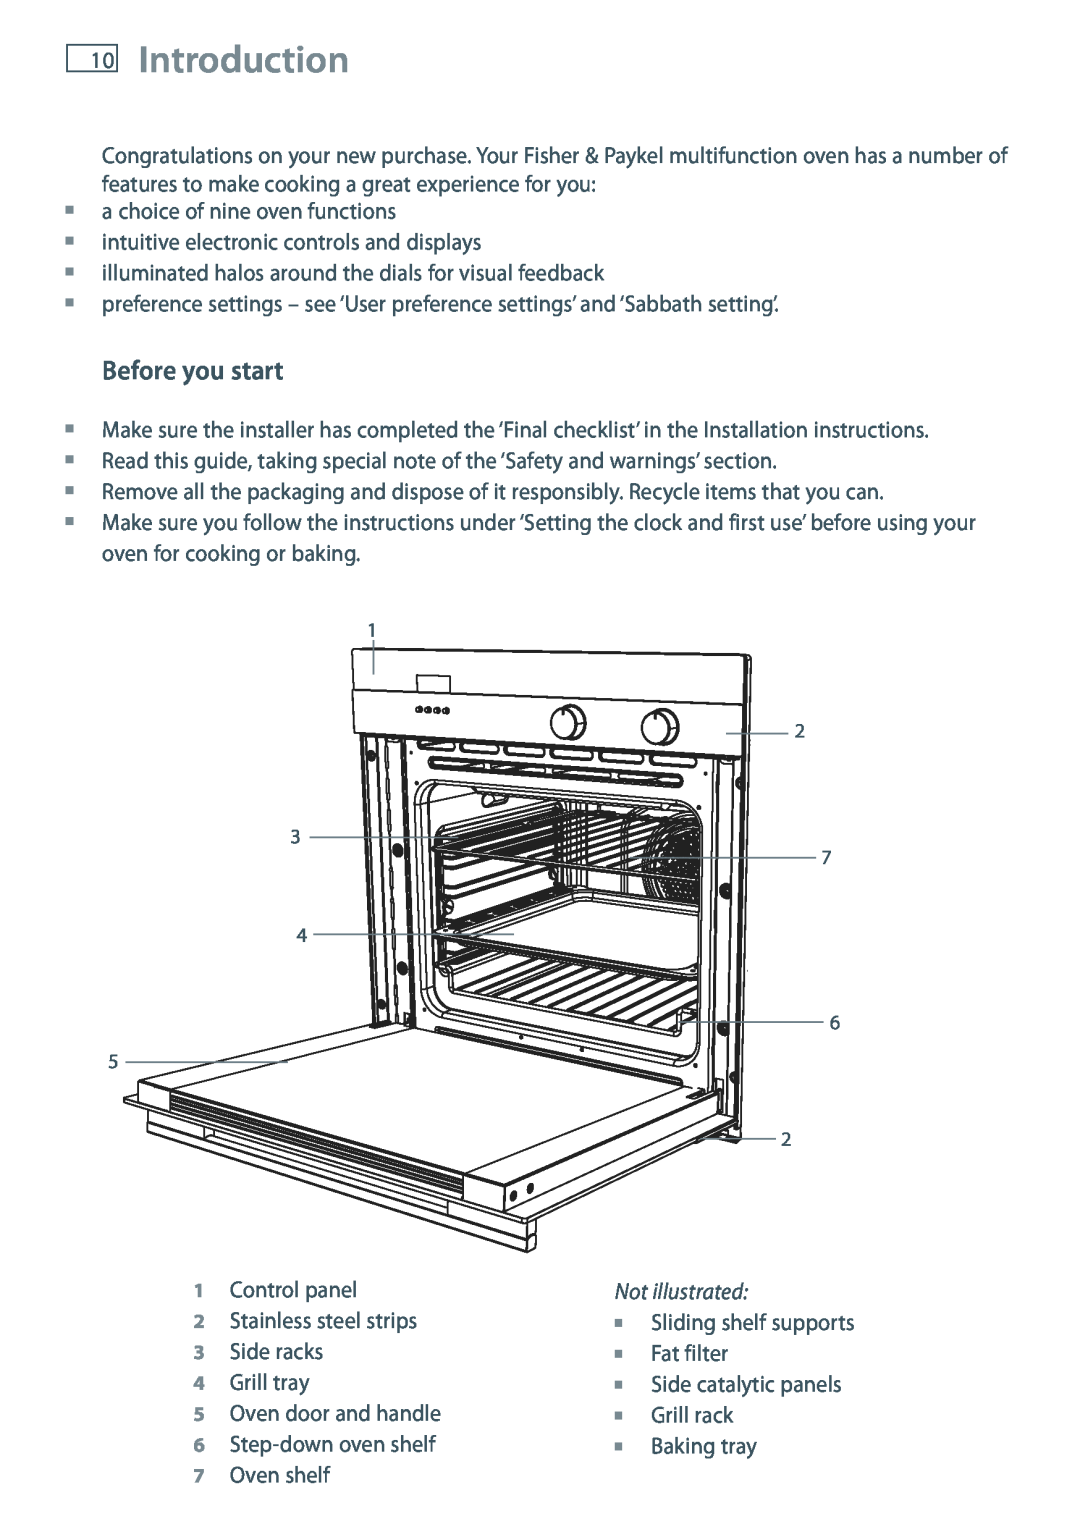 Fisher & Paykel OB60S9DE installation instructions Introduction, Before you start, Not illustrated 